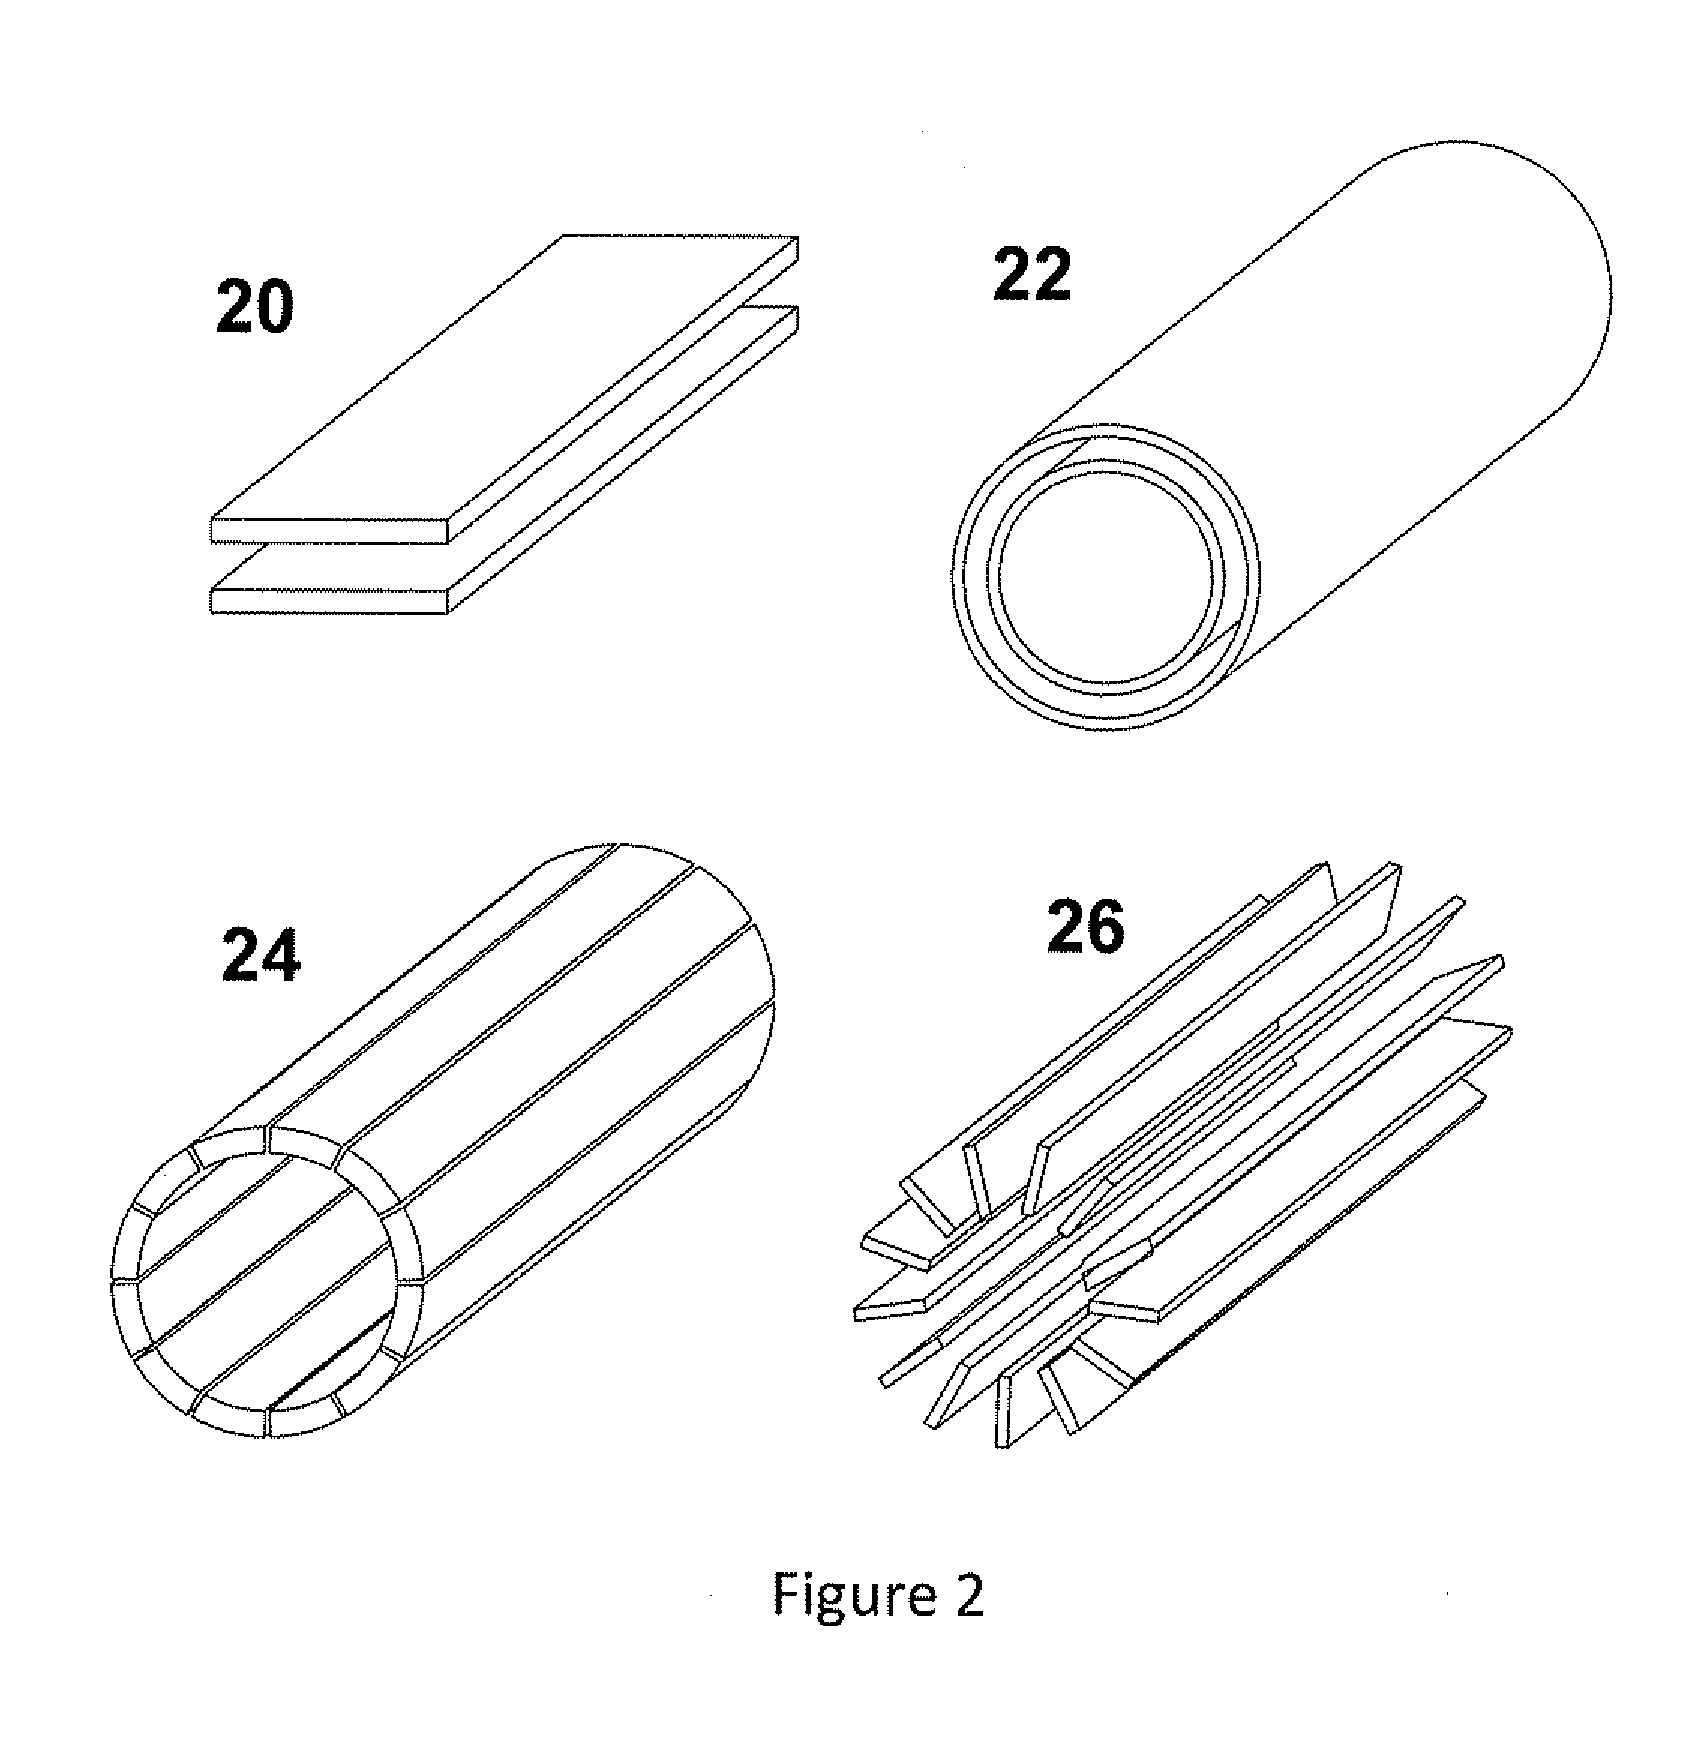 Ion analysis apparatus and method of use